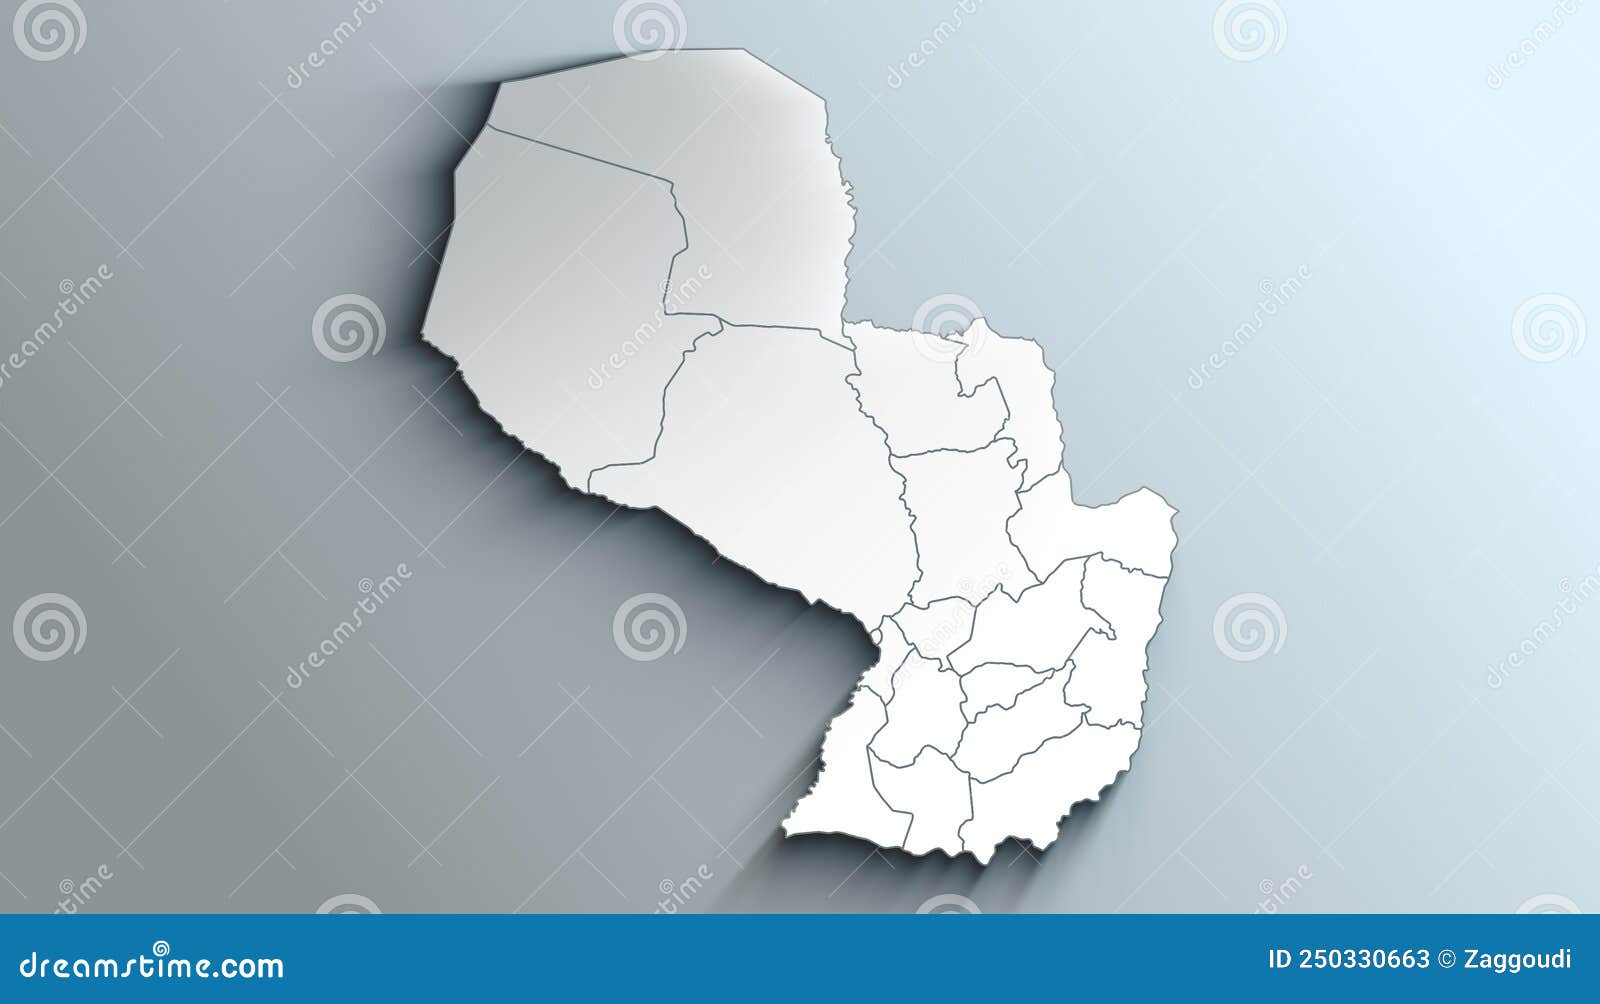 modern white map of paraguay with departments and territories with shadow